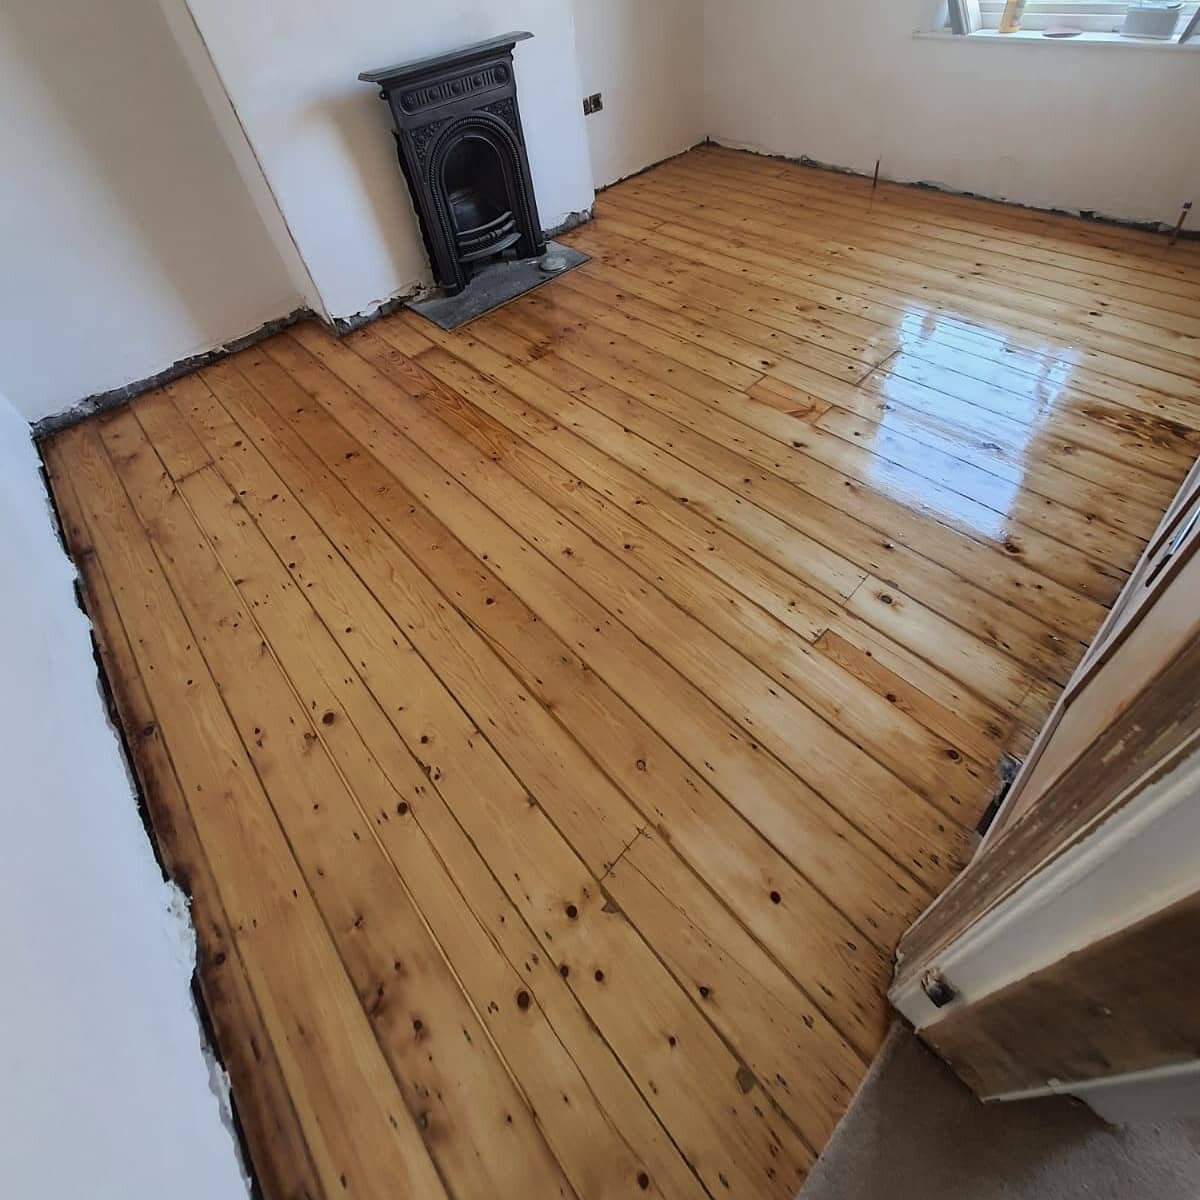 Two room, sanded and oiled to perfection 👌👌

Huscroft Flooring Limited